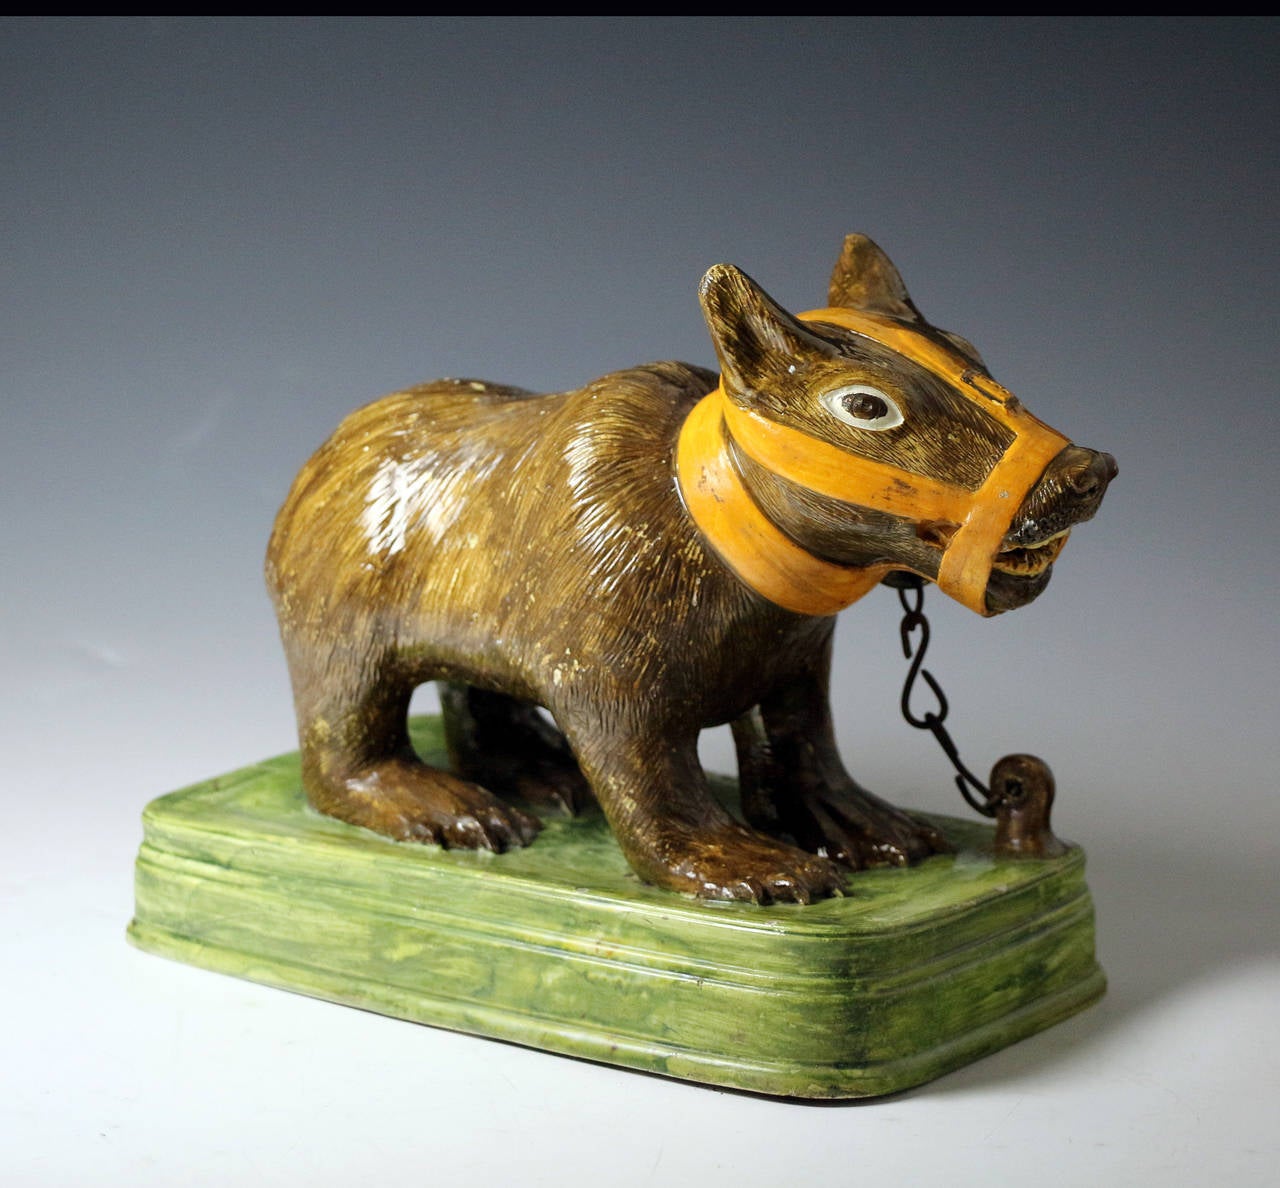 Rare unrecorded figure of a bear cub modeled muzzled and tethered with a metal chain on a green base. The figure is a significant size and is strongly decorated in pratt colours. 
Bear baiting was a popular 